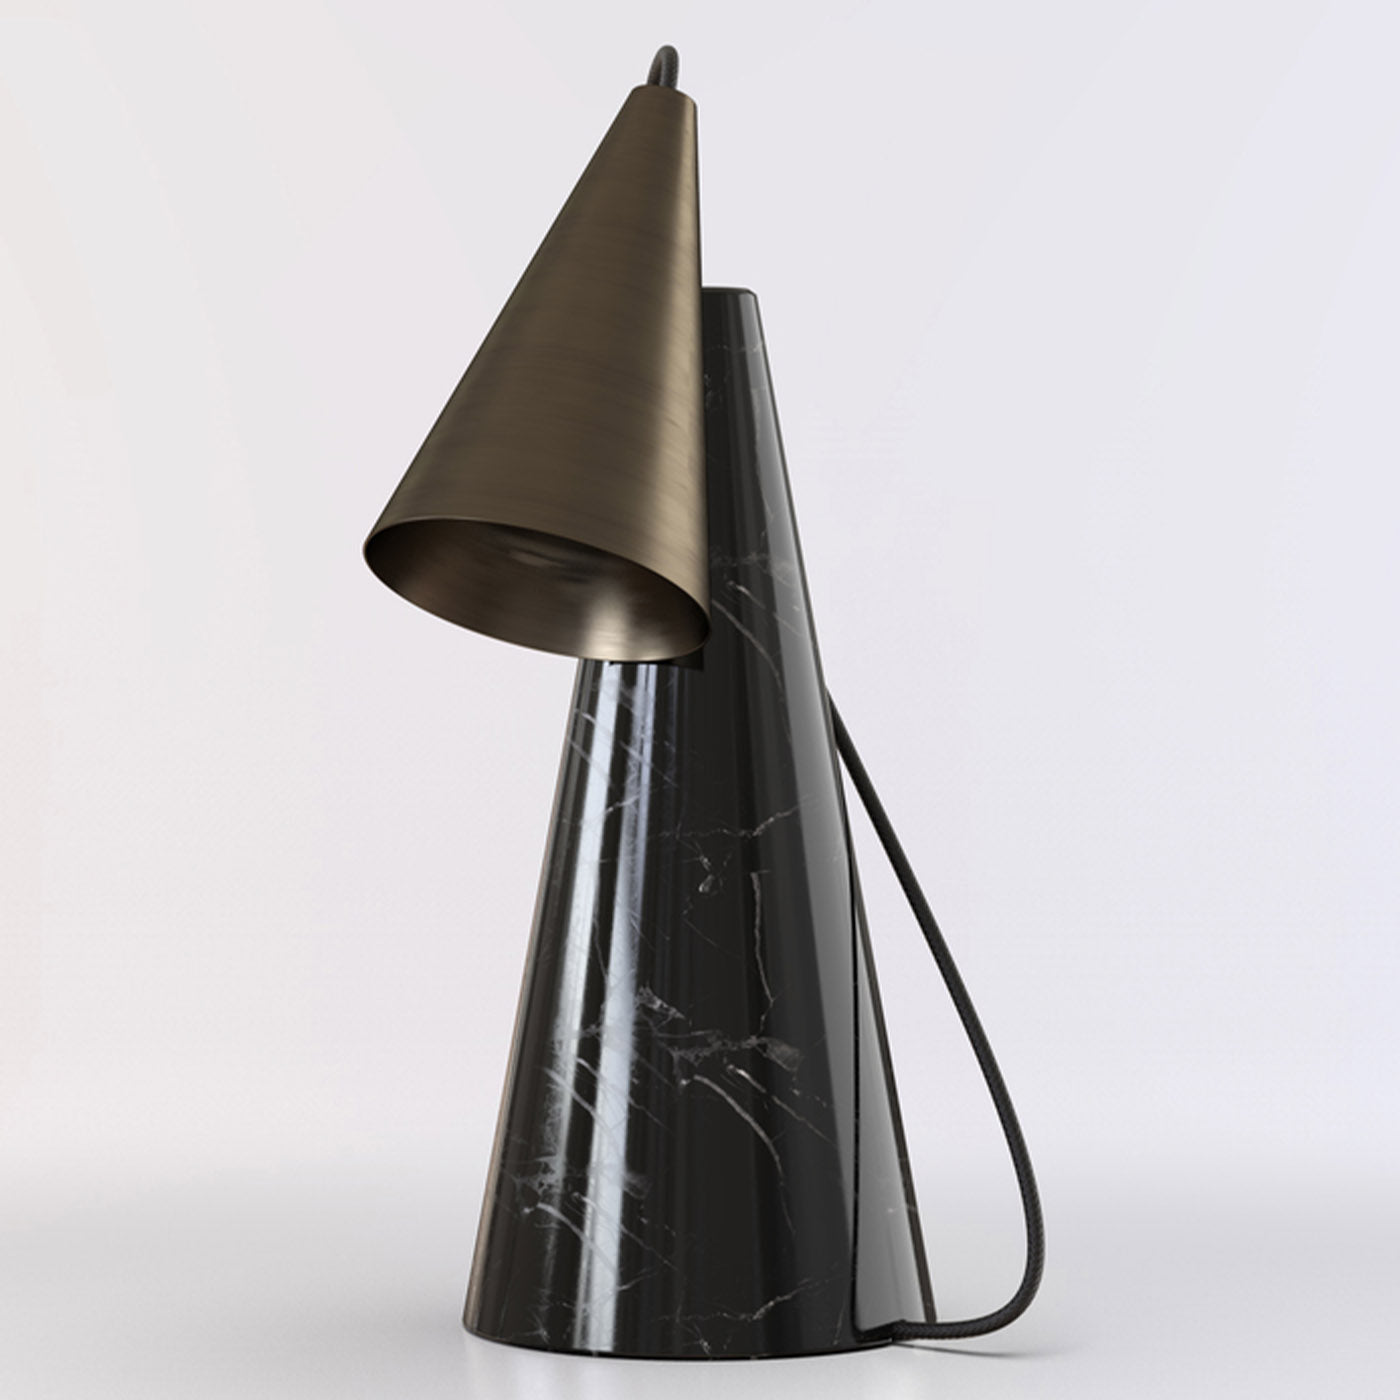 ED038 Black Stone and Bronze Table Lamp - Alternative view 1